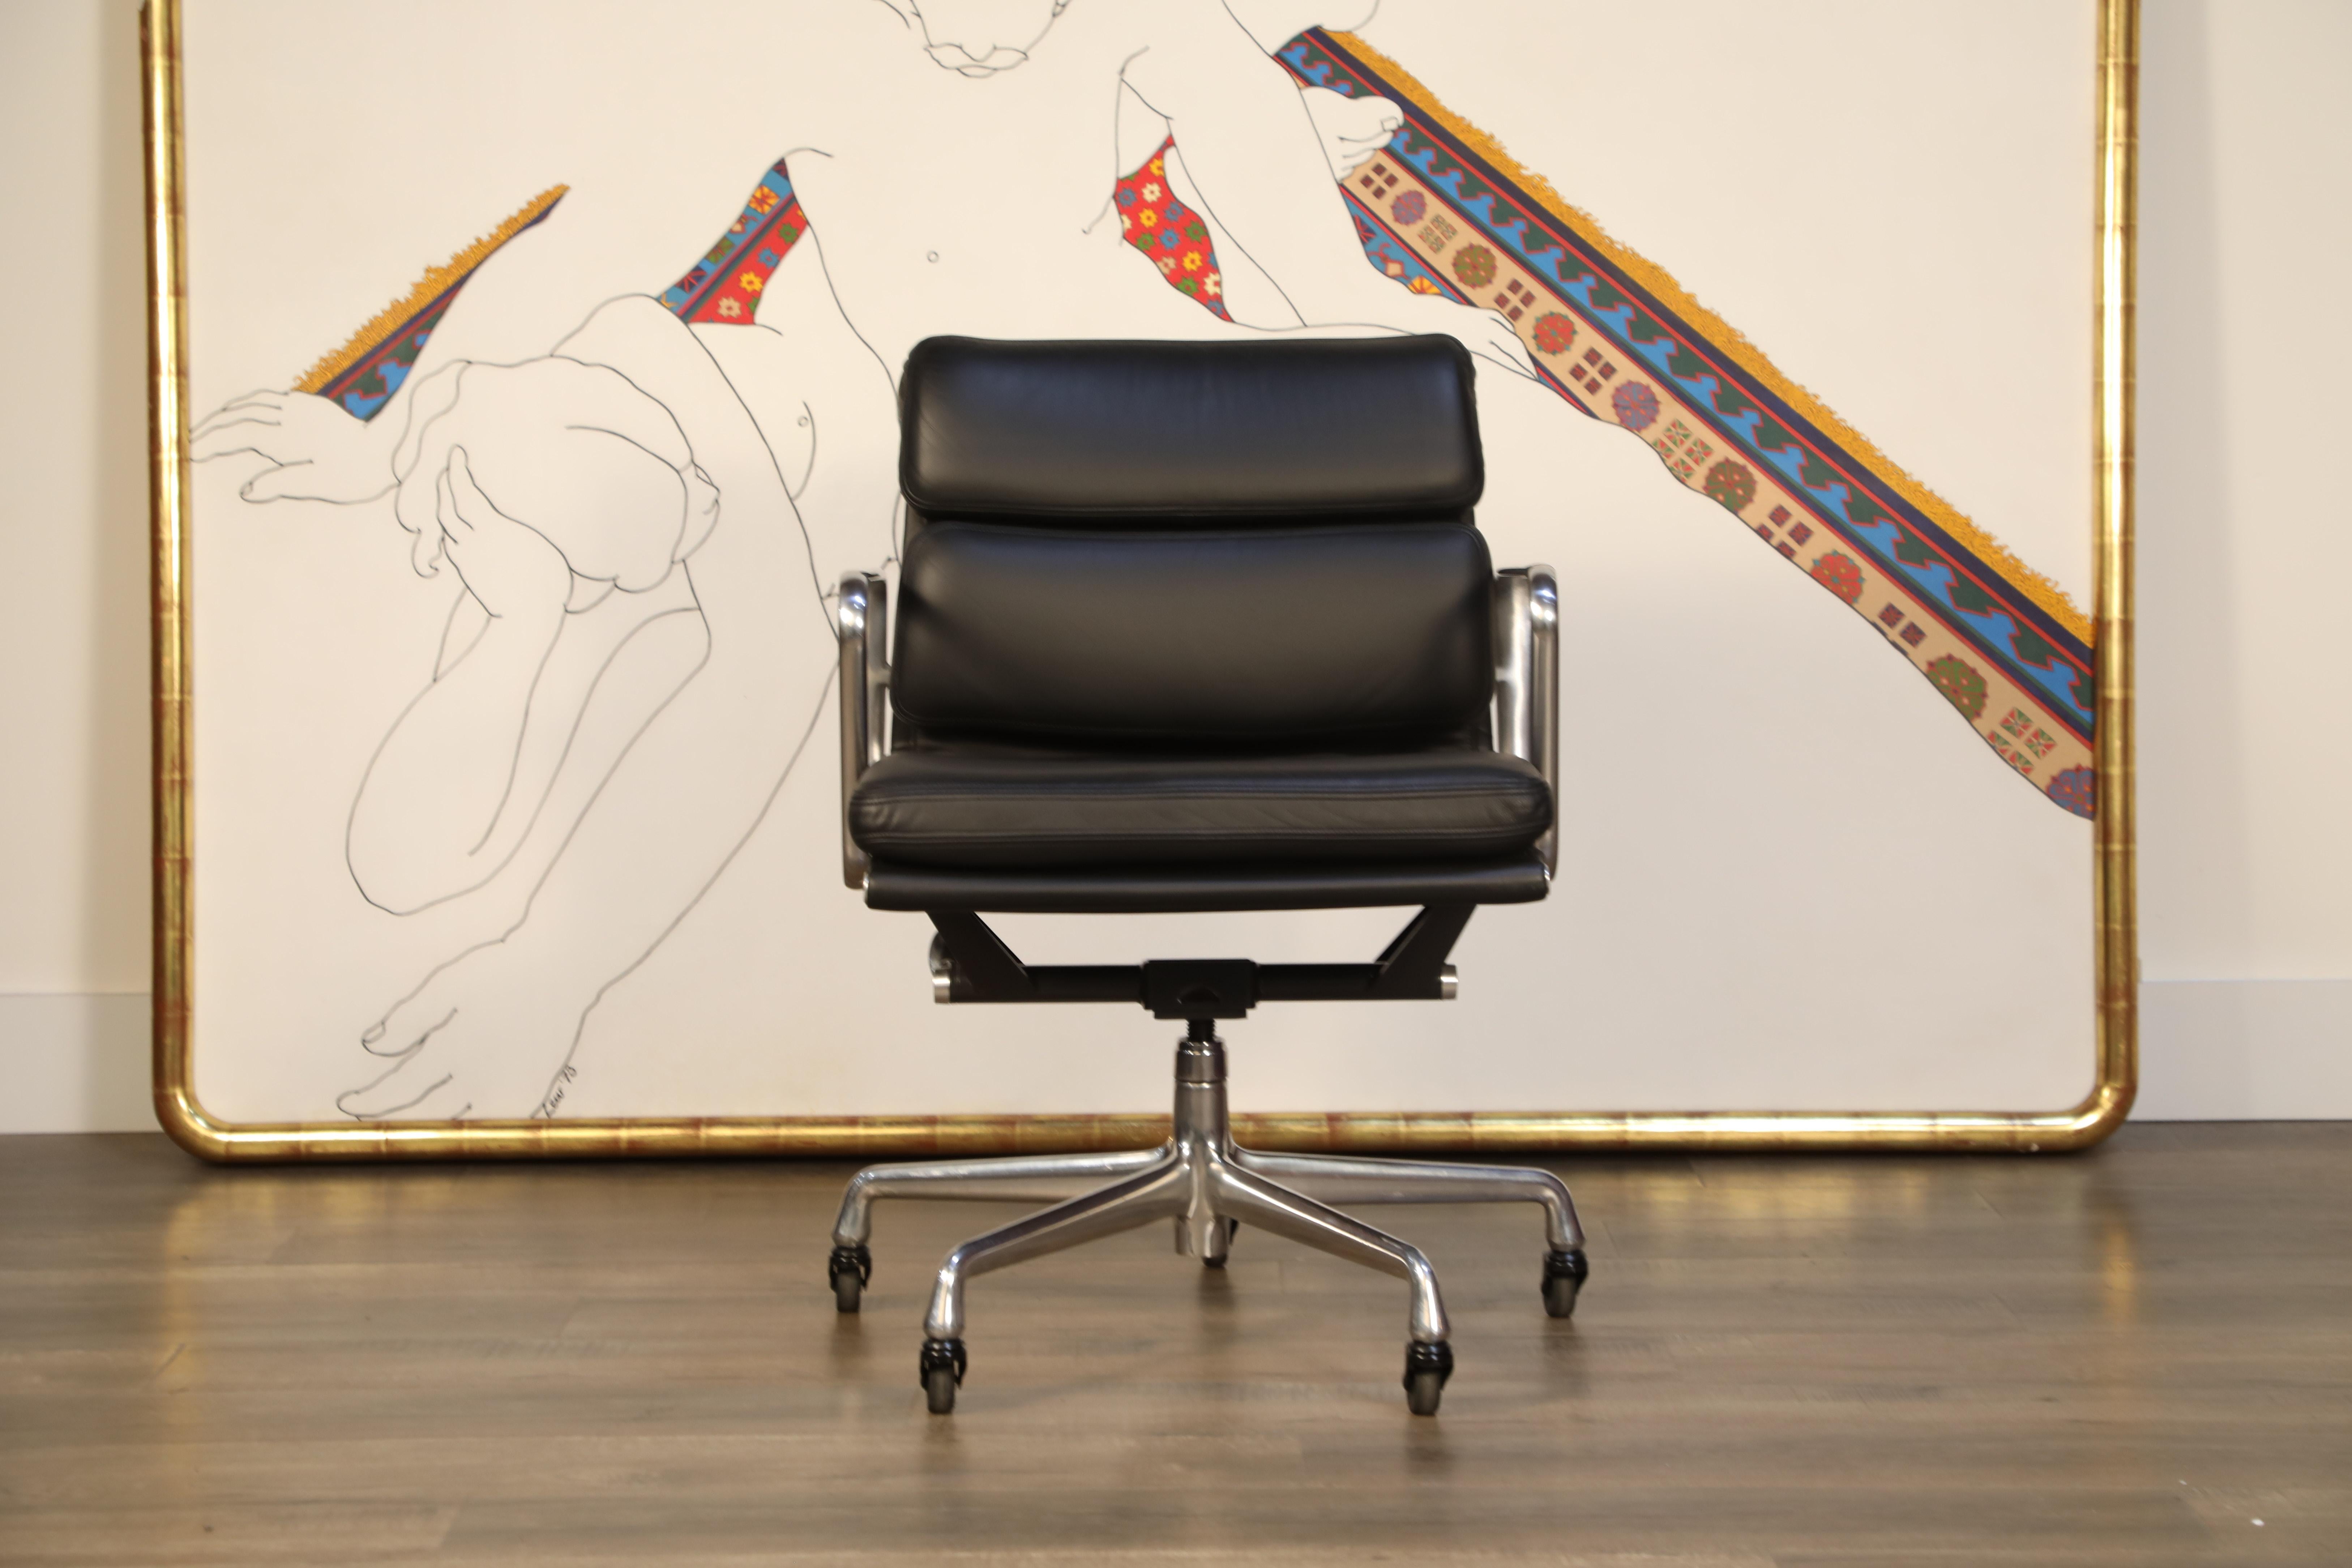 This incredible near mint condition chair is the Classic 'Soft Pad Management Chair' from the aluminum group line, designed by Charles and Ray Eames for Herman Miller. Featuring the original vintage black leather upholstery over five-star polished